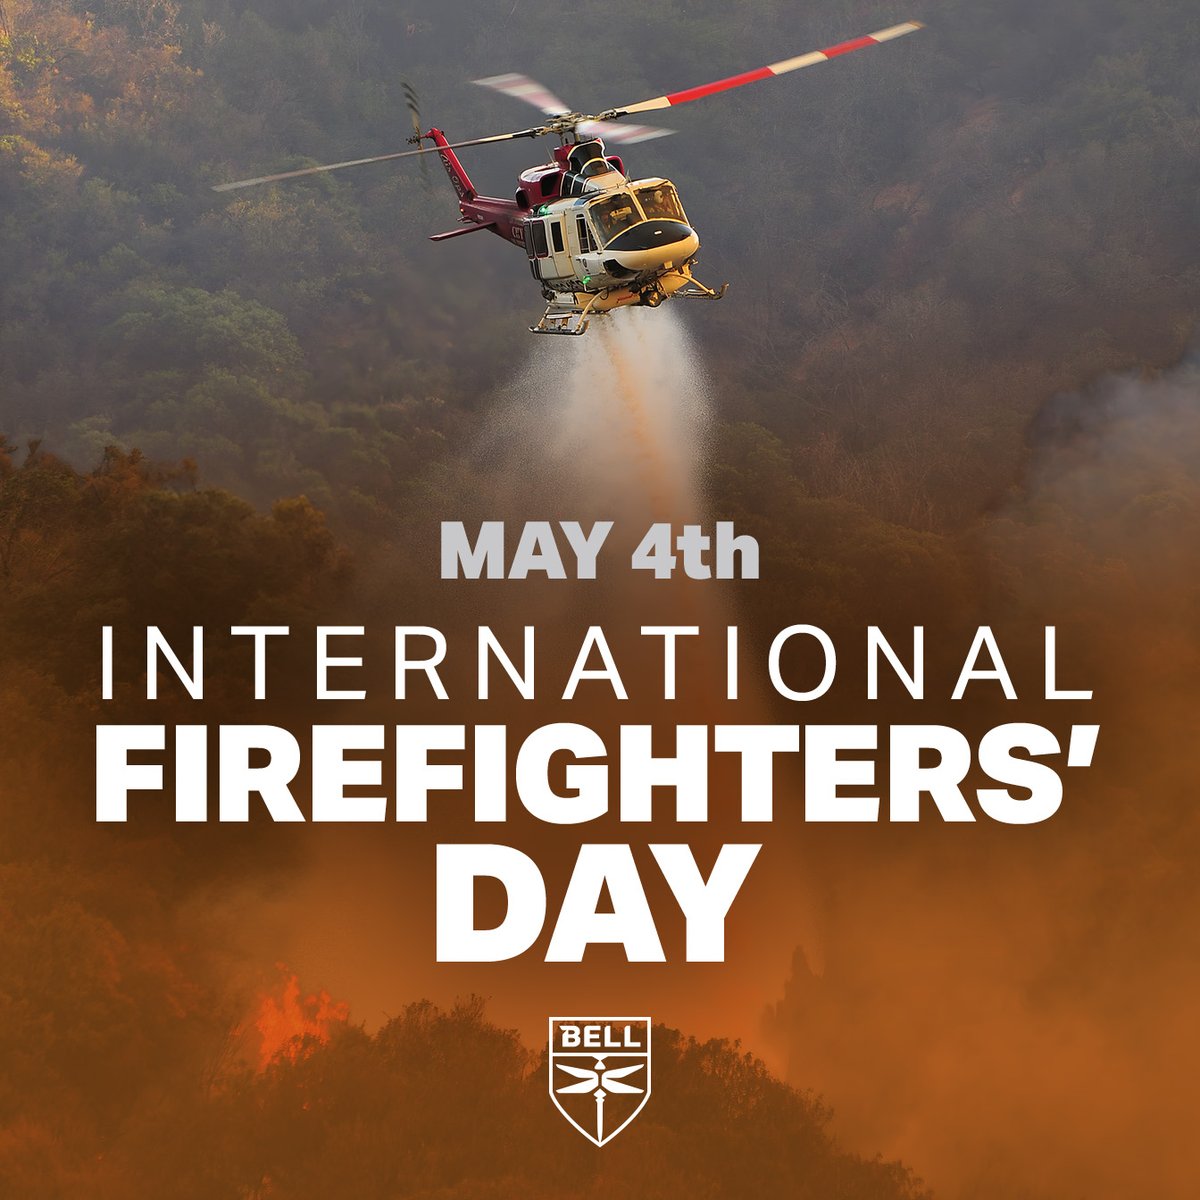 Happy International #Firefighters Day! We're honored to support your missions. #publicsafety #internationalfirefightersday #bellflight